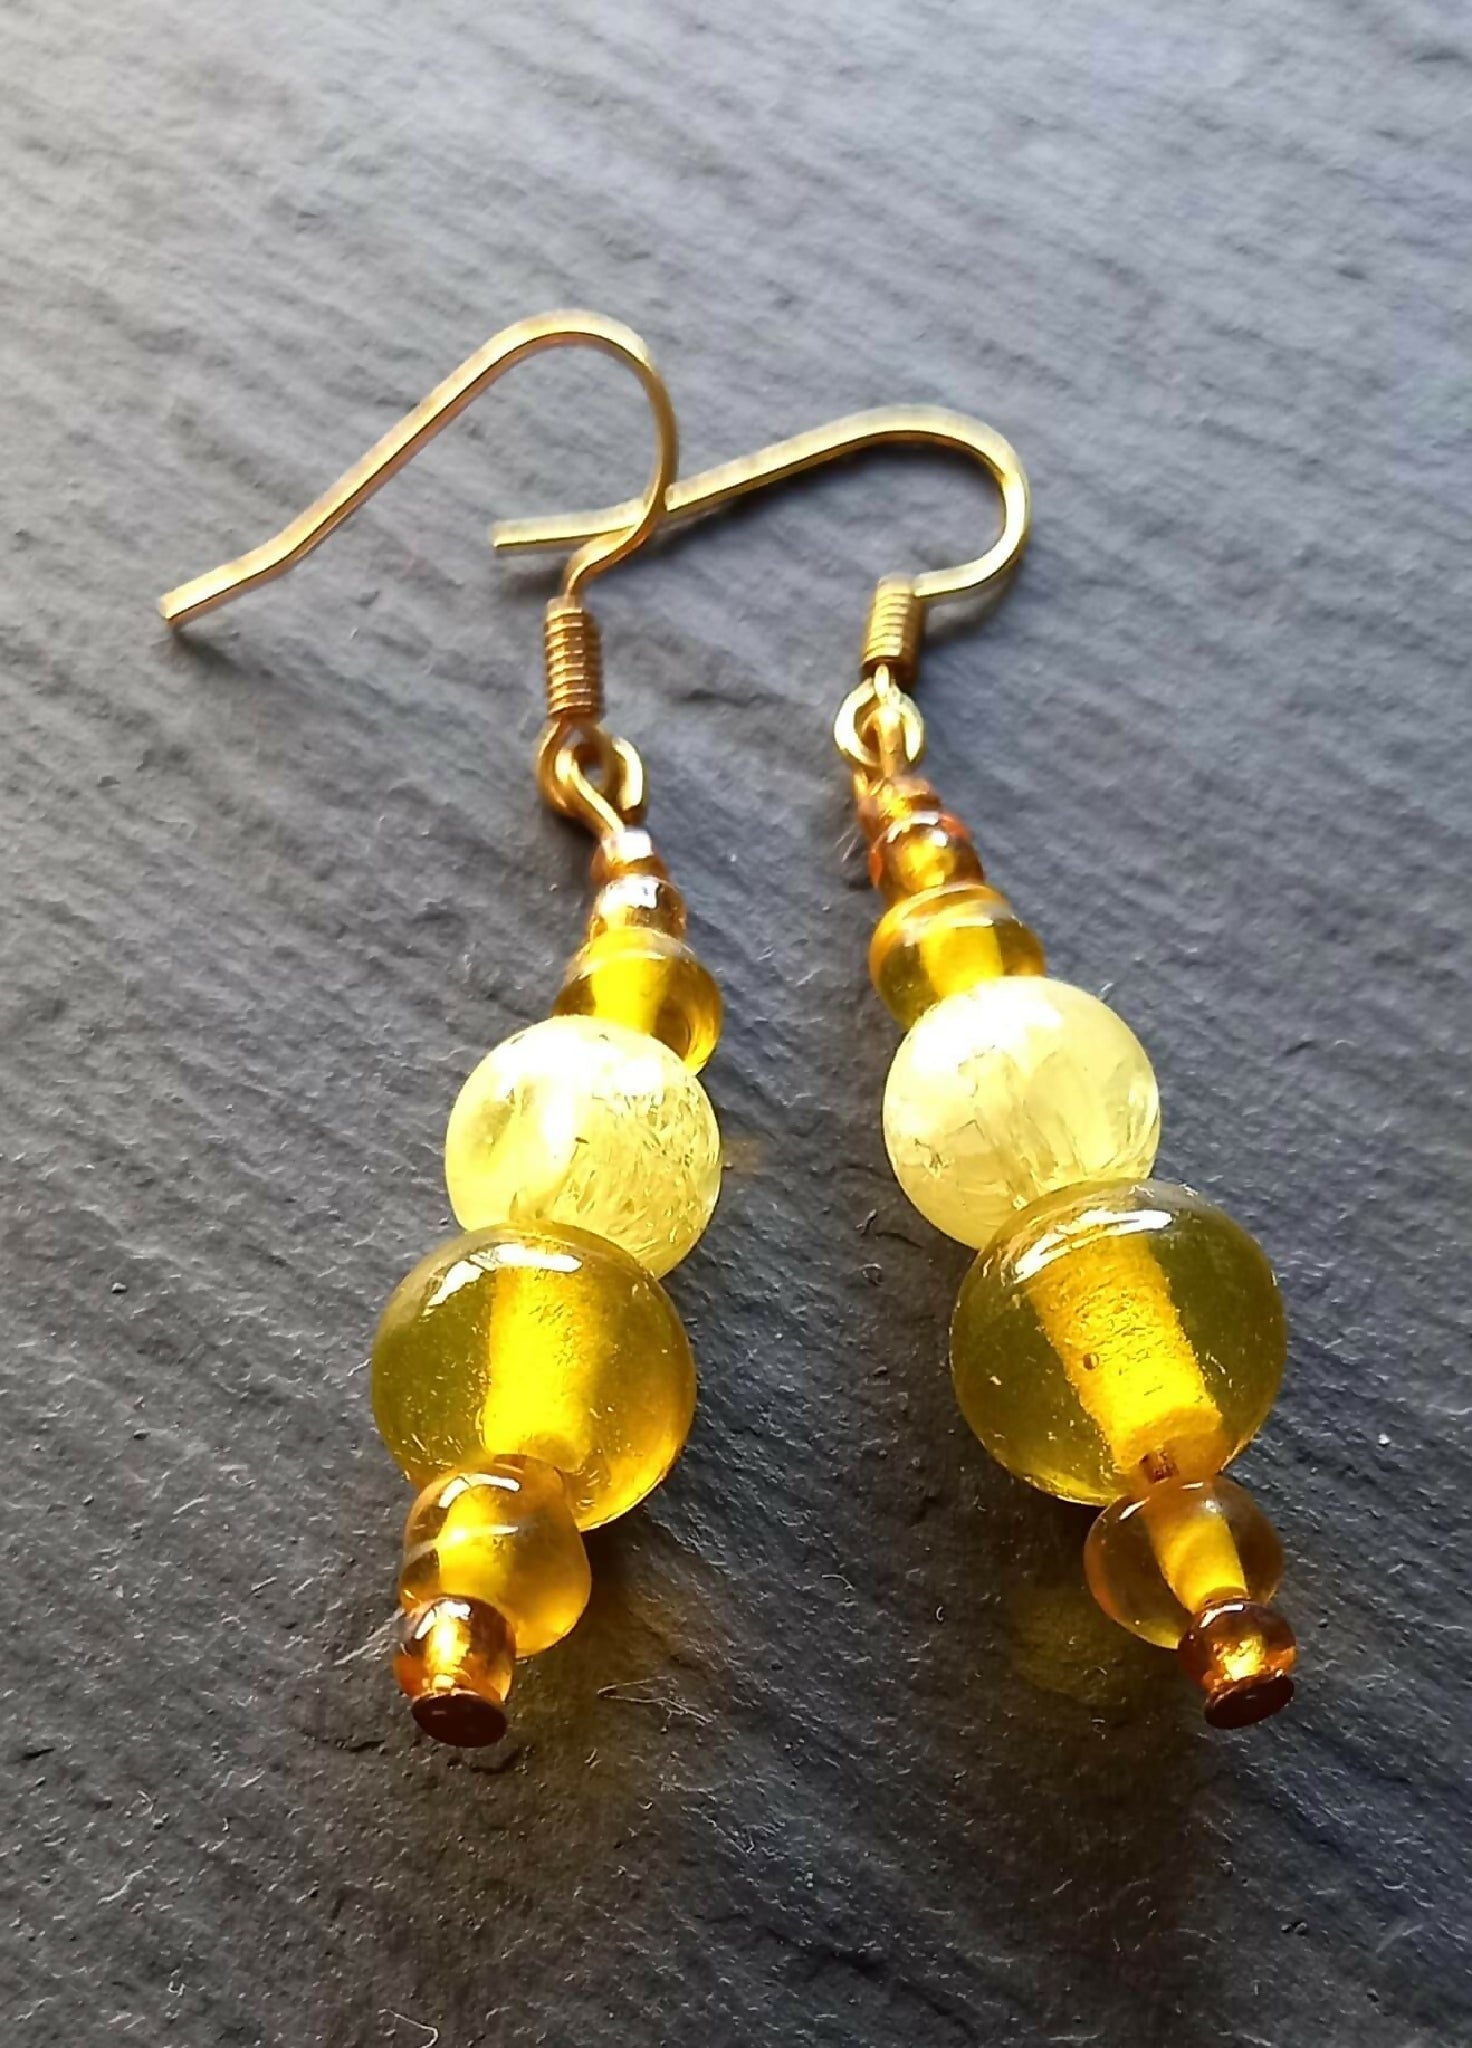 Earrings - All Yellow Crackle Beads